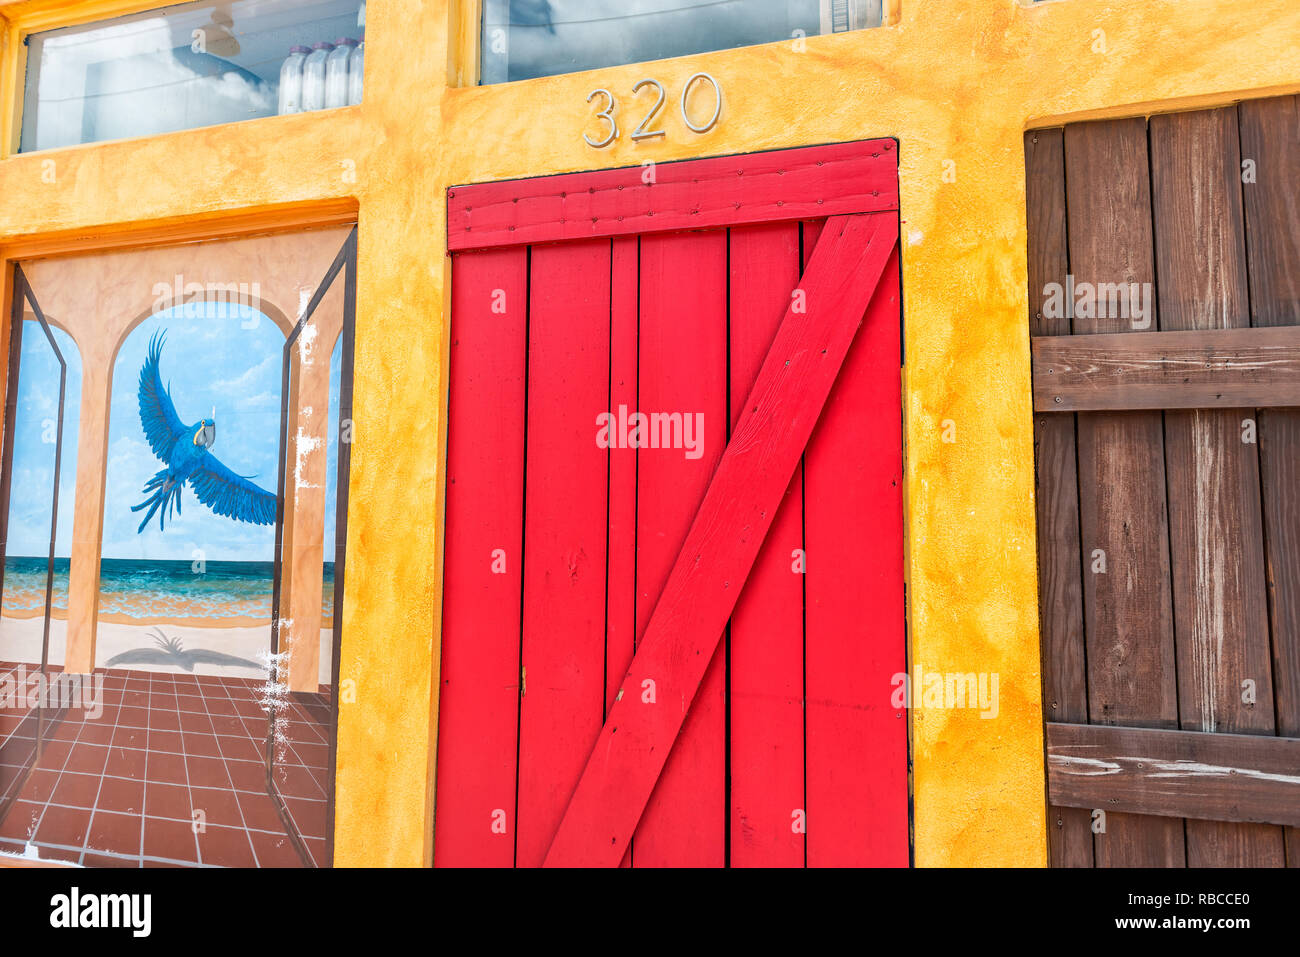 Key West Usa May 1 2018 Colorful Vibrant Saturated Yellow And Orange Colors At Famous Tropical Cafe Or Restaurant Facade Exterior In Florida Tra Stock Photo Alamy